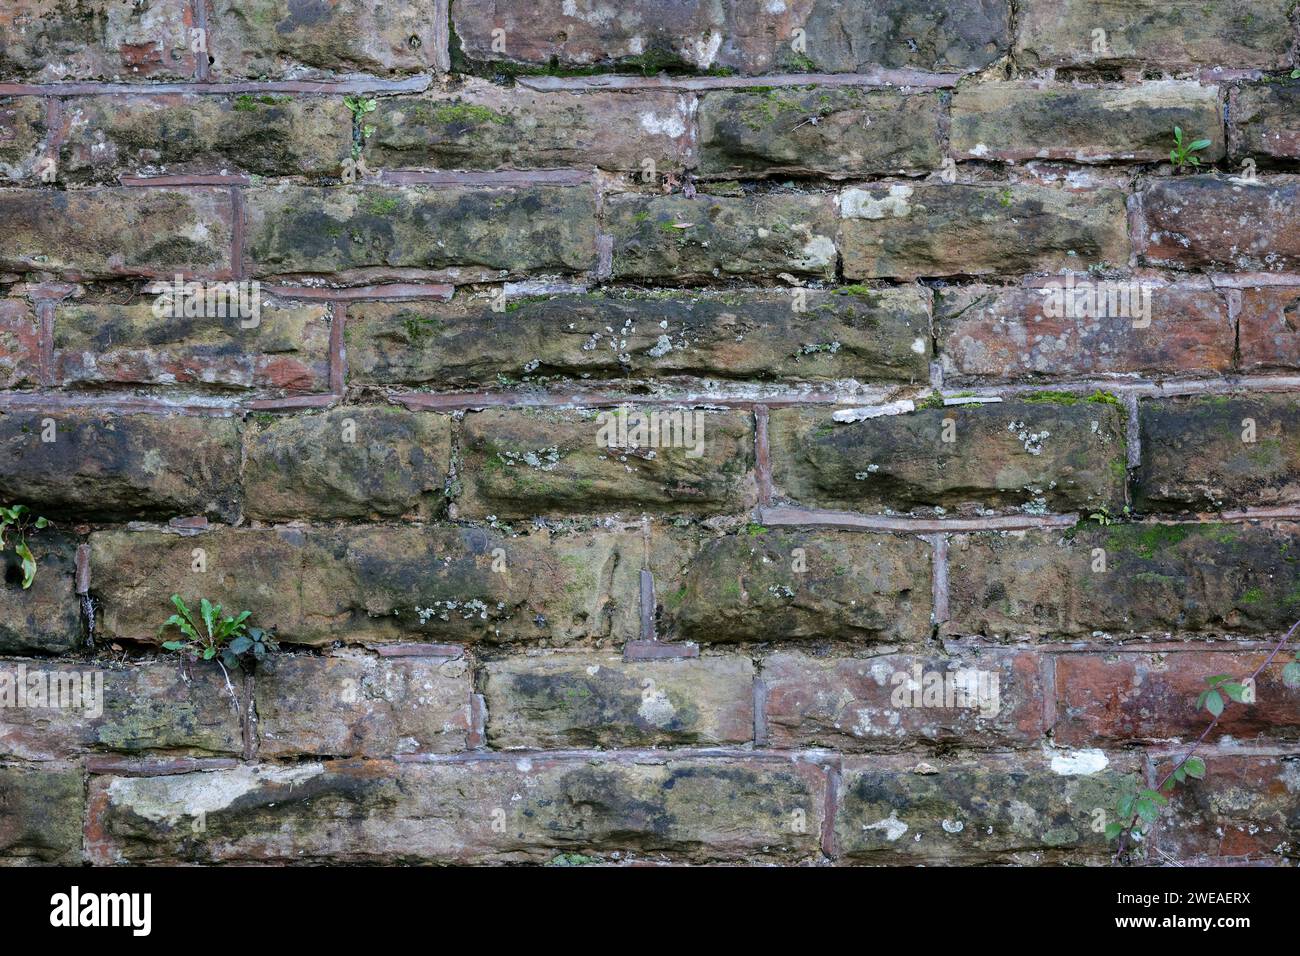 Brick wall railway bridge Horsham old worn weathered texture and shapes ideal for composite image background texture blending as added layer Stock Photo